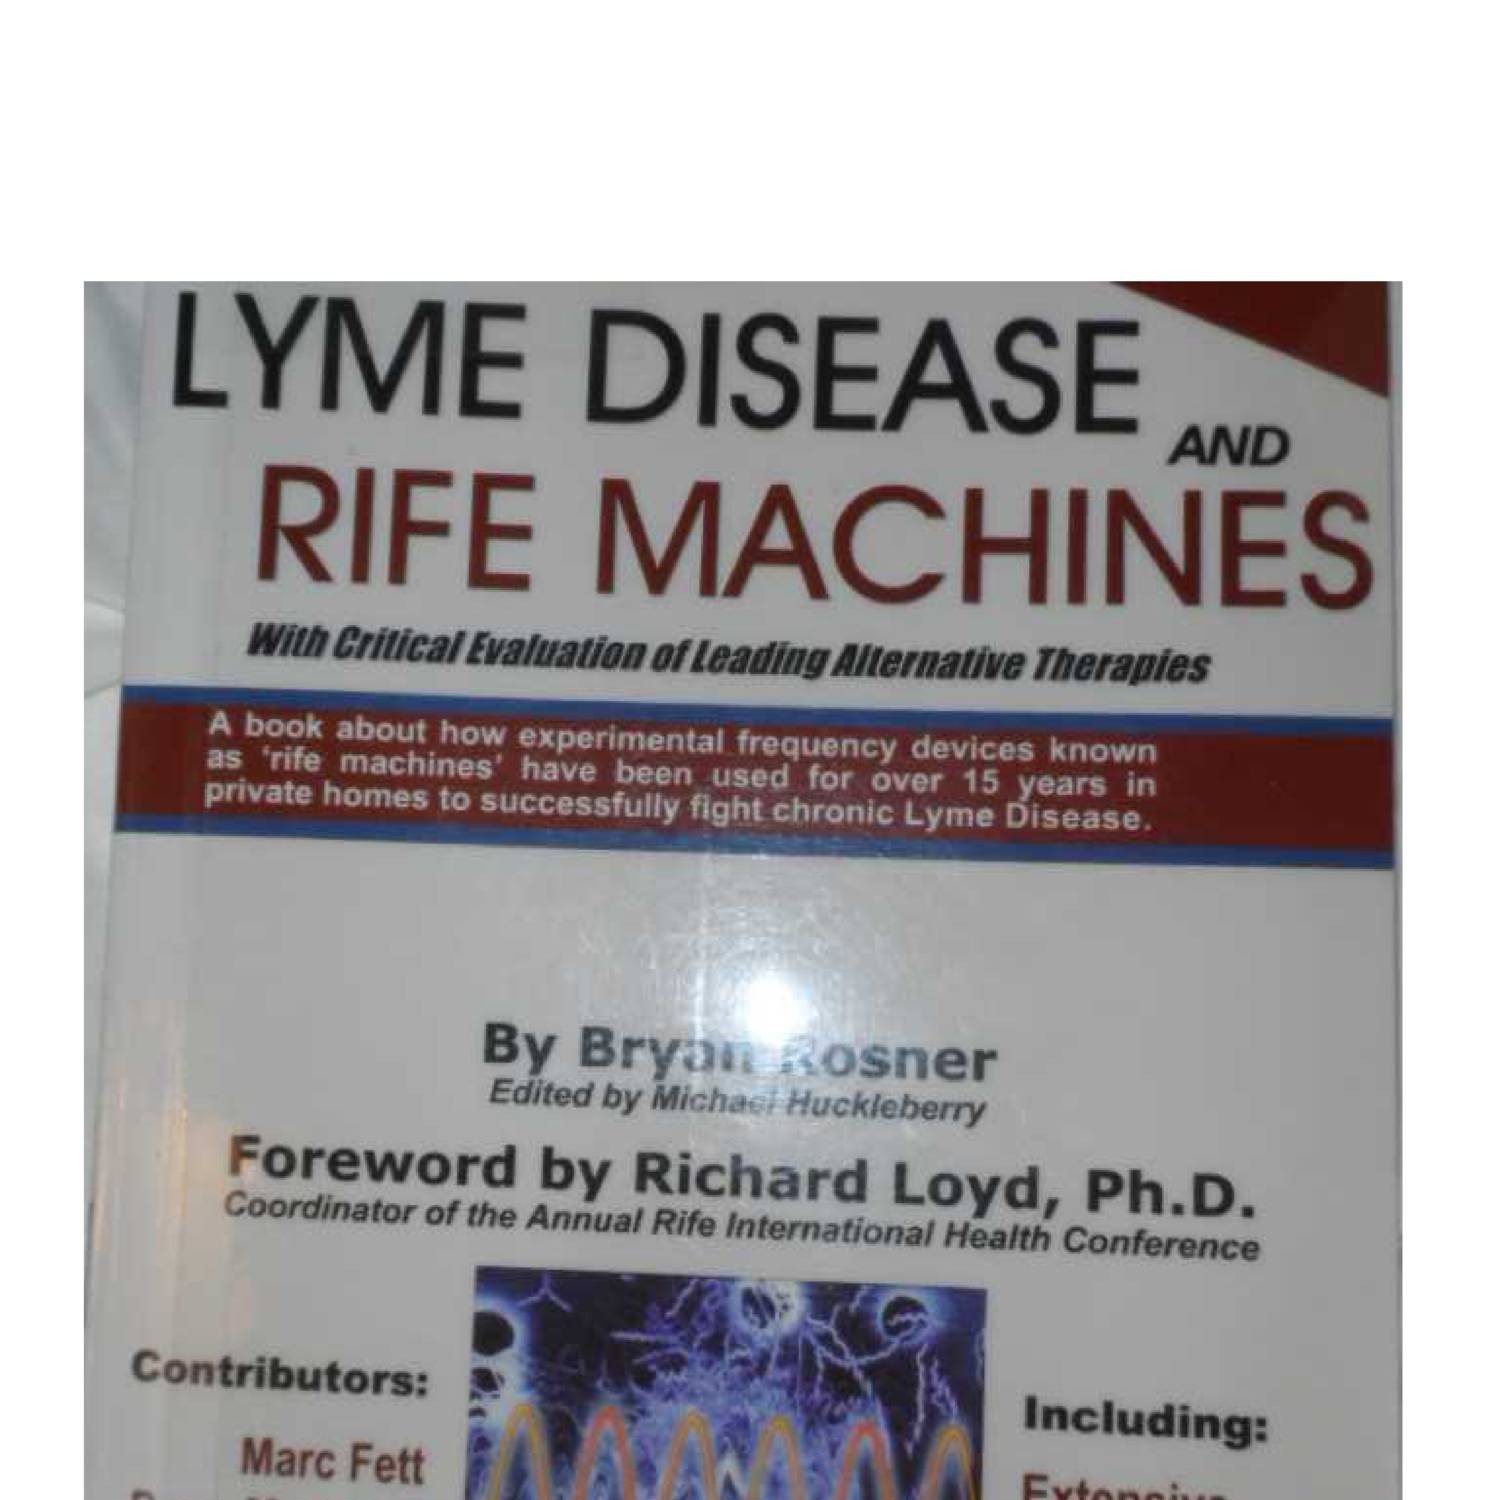 https://www.docdroid.net/thumbnail/gplh/1500,1500/when-antibiotics-fail-lyme-disease-and-rife-machines-with-critical-evaluation-of-leading-alternative-therapies-pdf.jpg